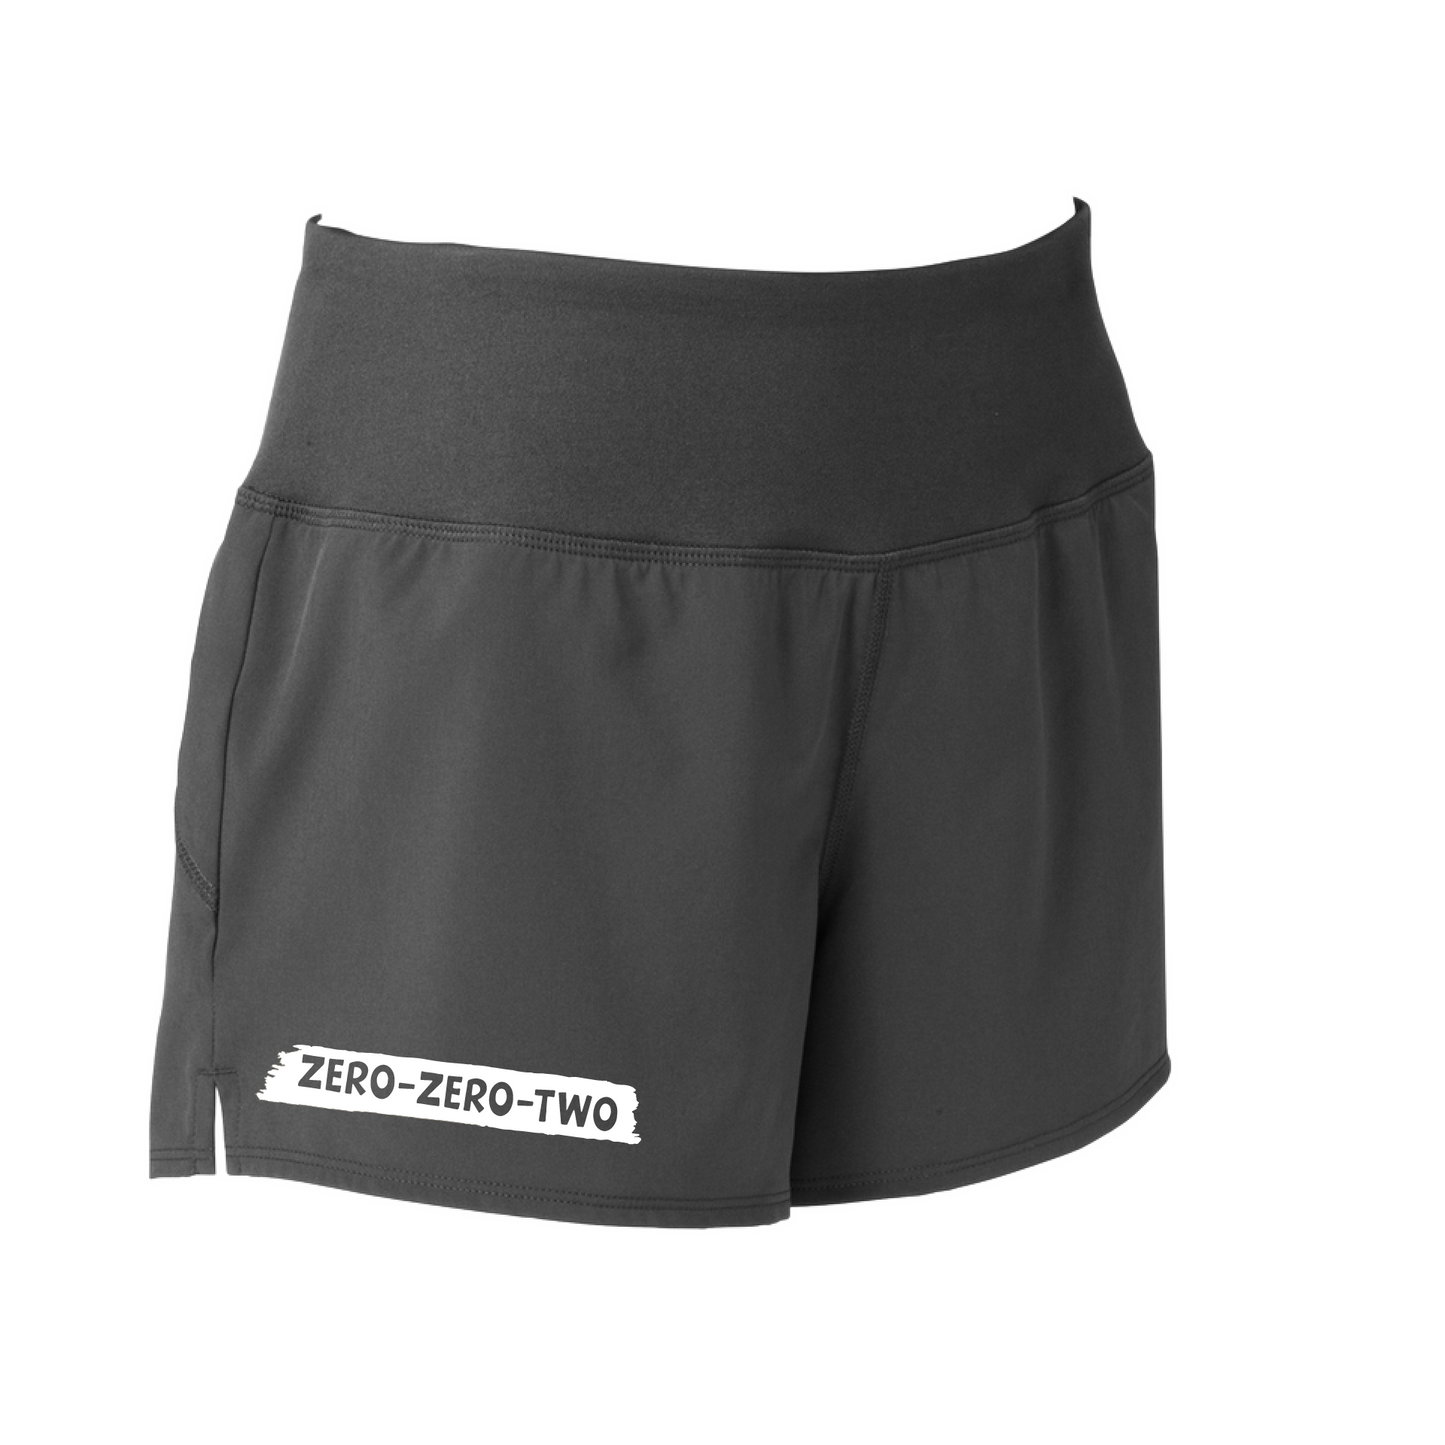 Pickleball Shorts Designs: Zero Zero Two  Sport Tek women’s repeat shorts come with built-in cell phone pocket on the exterior of the waistband. You can also feel secure knowing that no matter how strenuous the exercise, the shorts will remain in place (it won’t ride up!). These shorts are extremely versatile and trendy. Transition from the Pickleball court to running errands smoothly.